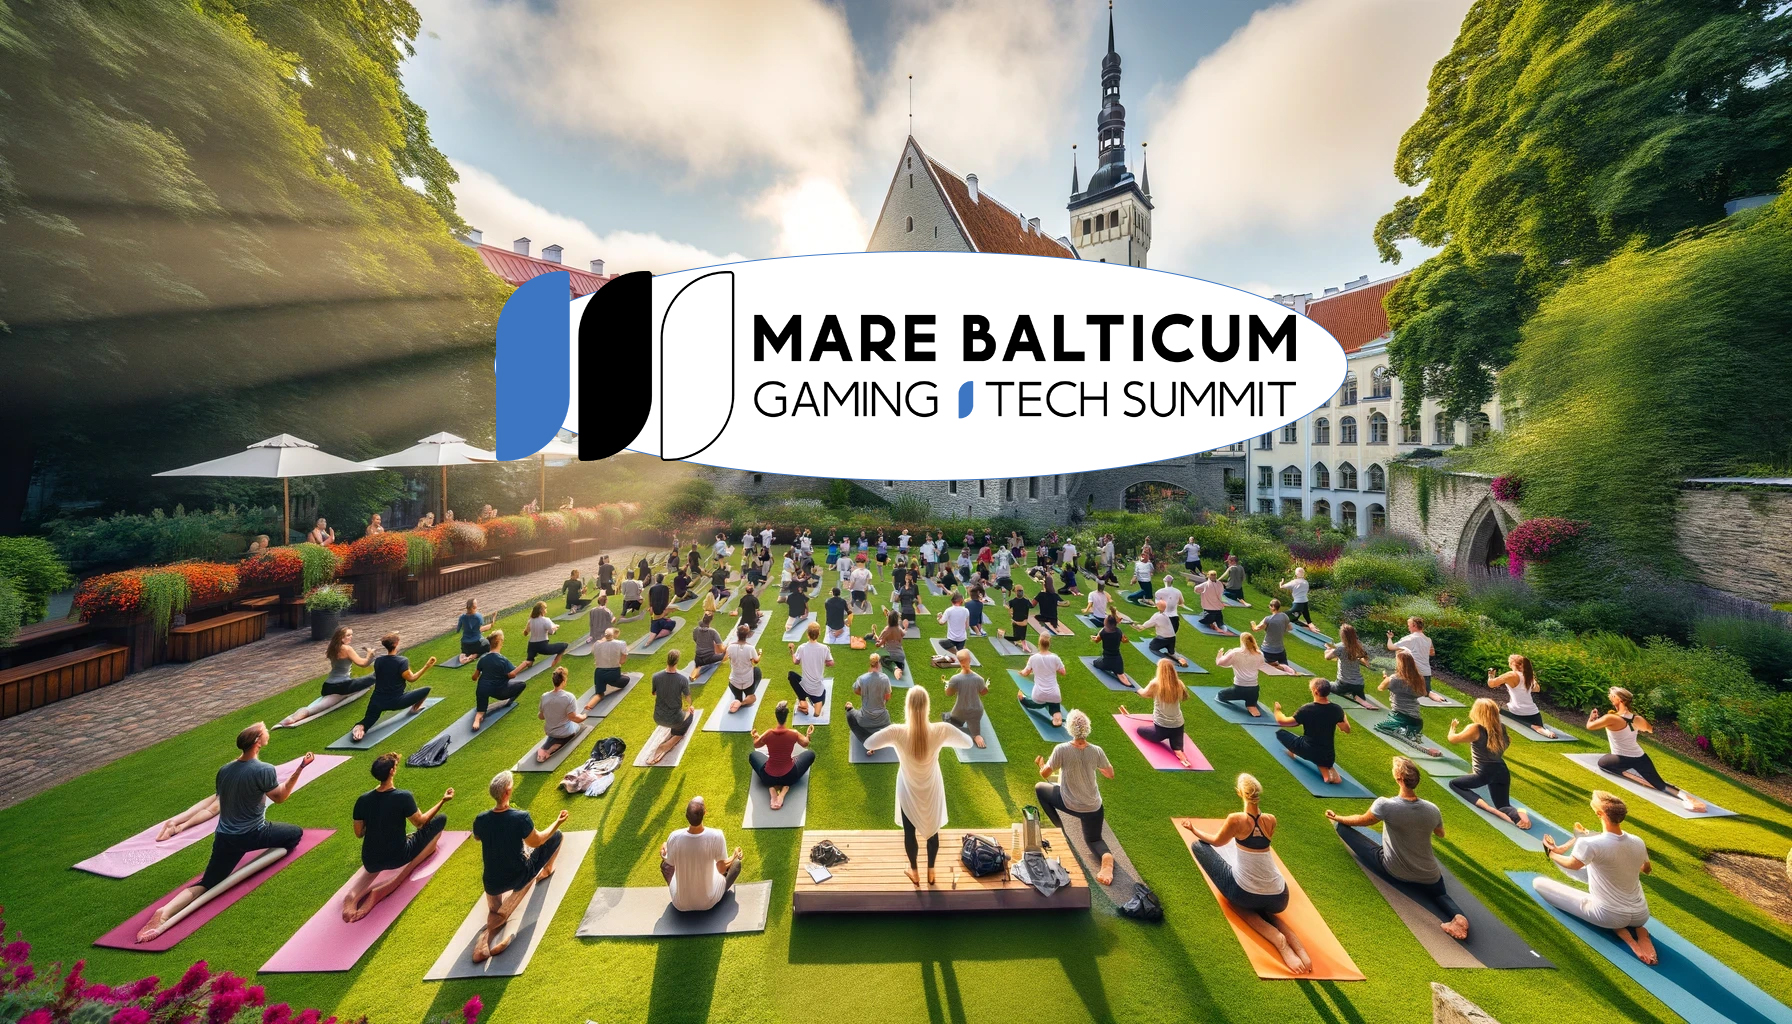 As we gather in the beautiful city of Tallinn, Estonia, from June 4th to 5th, we're excited to announce that HIPTHER is adding a touch of wellness and active networking to the event.